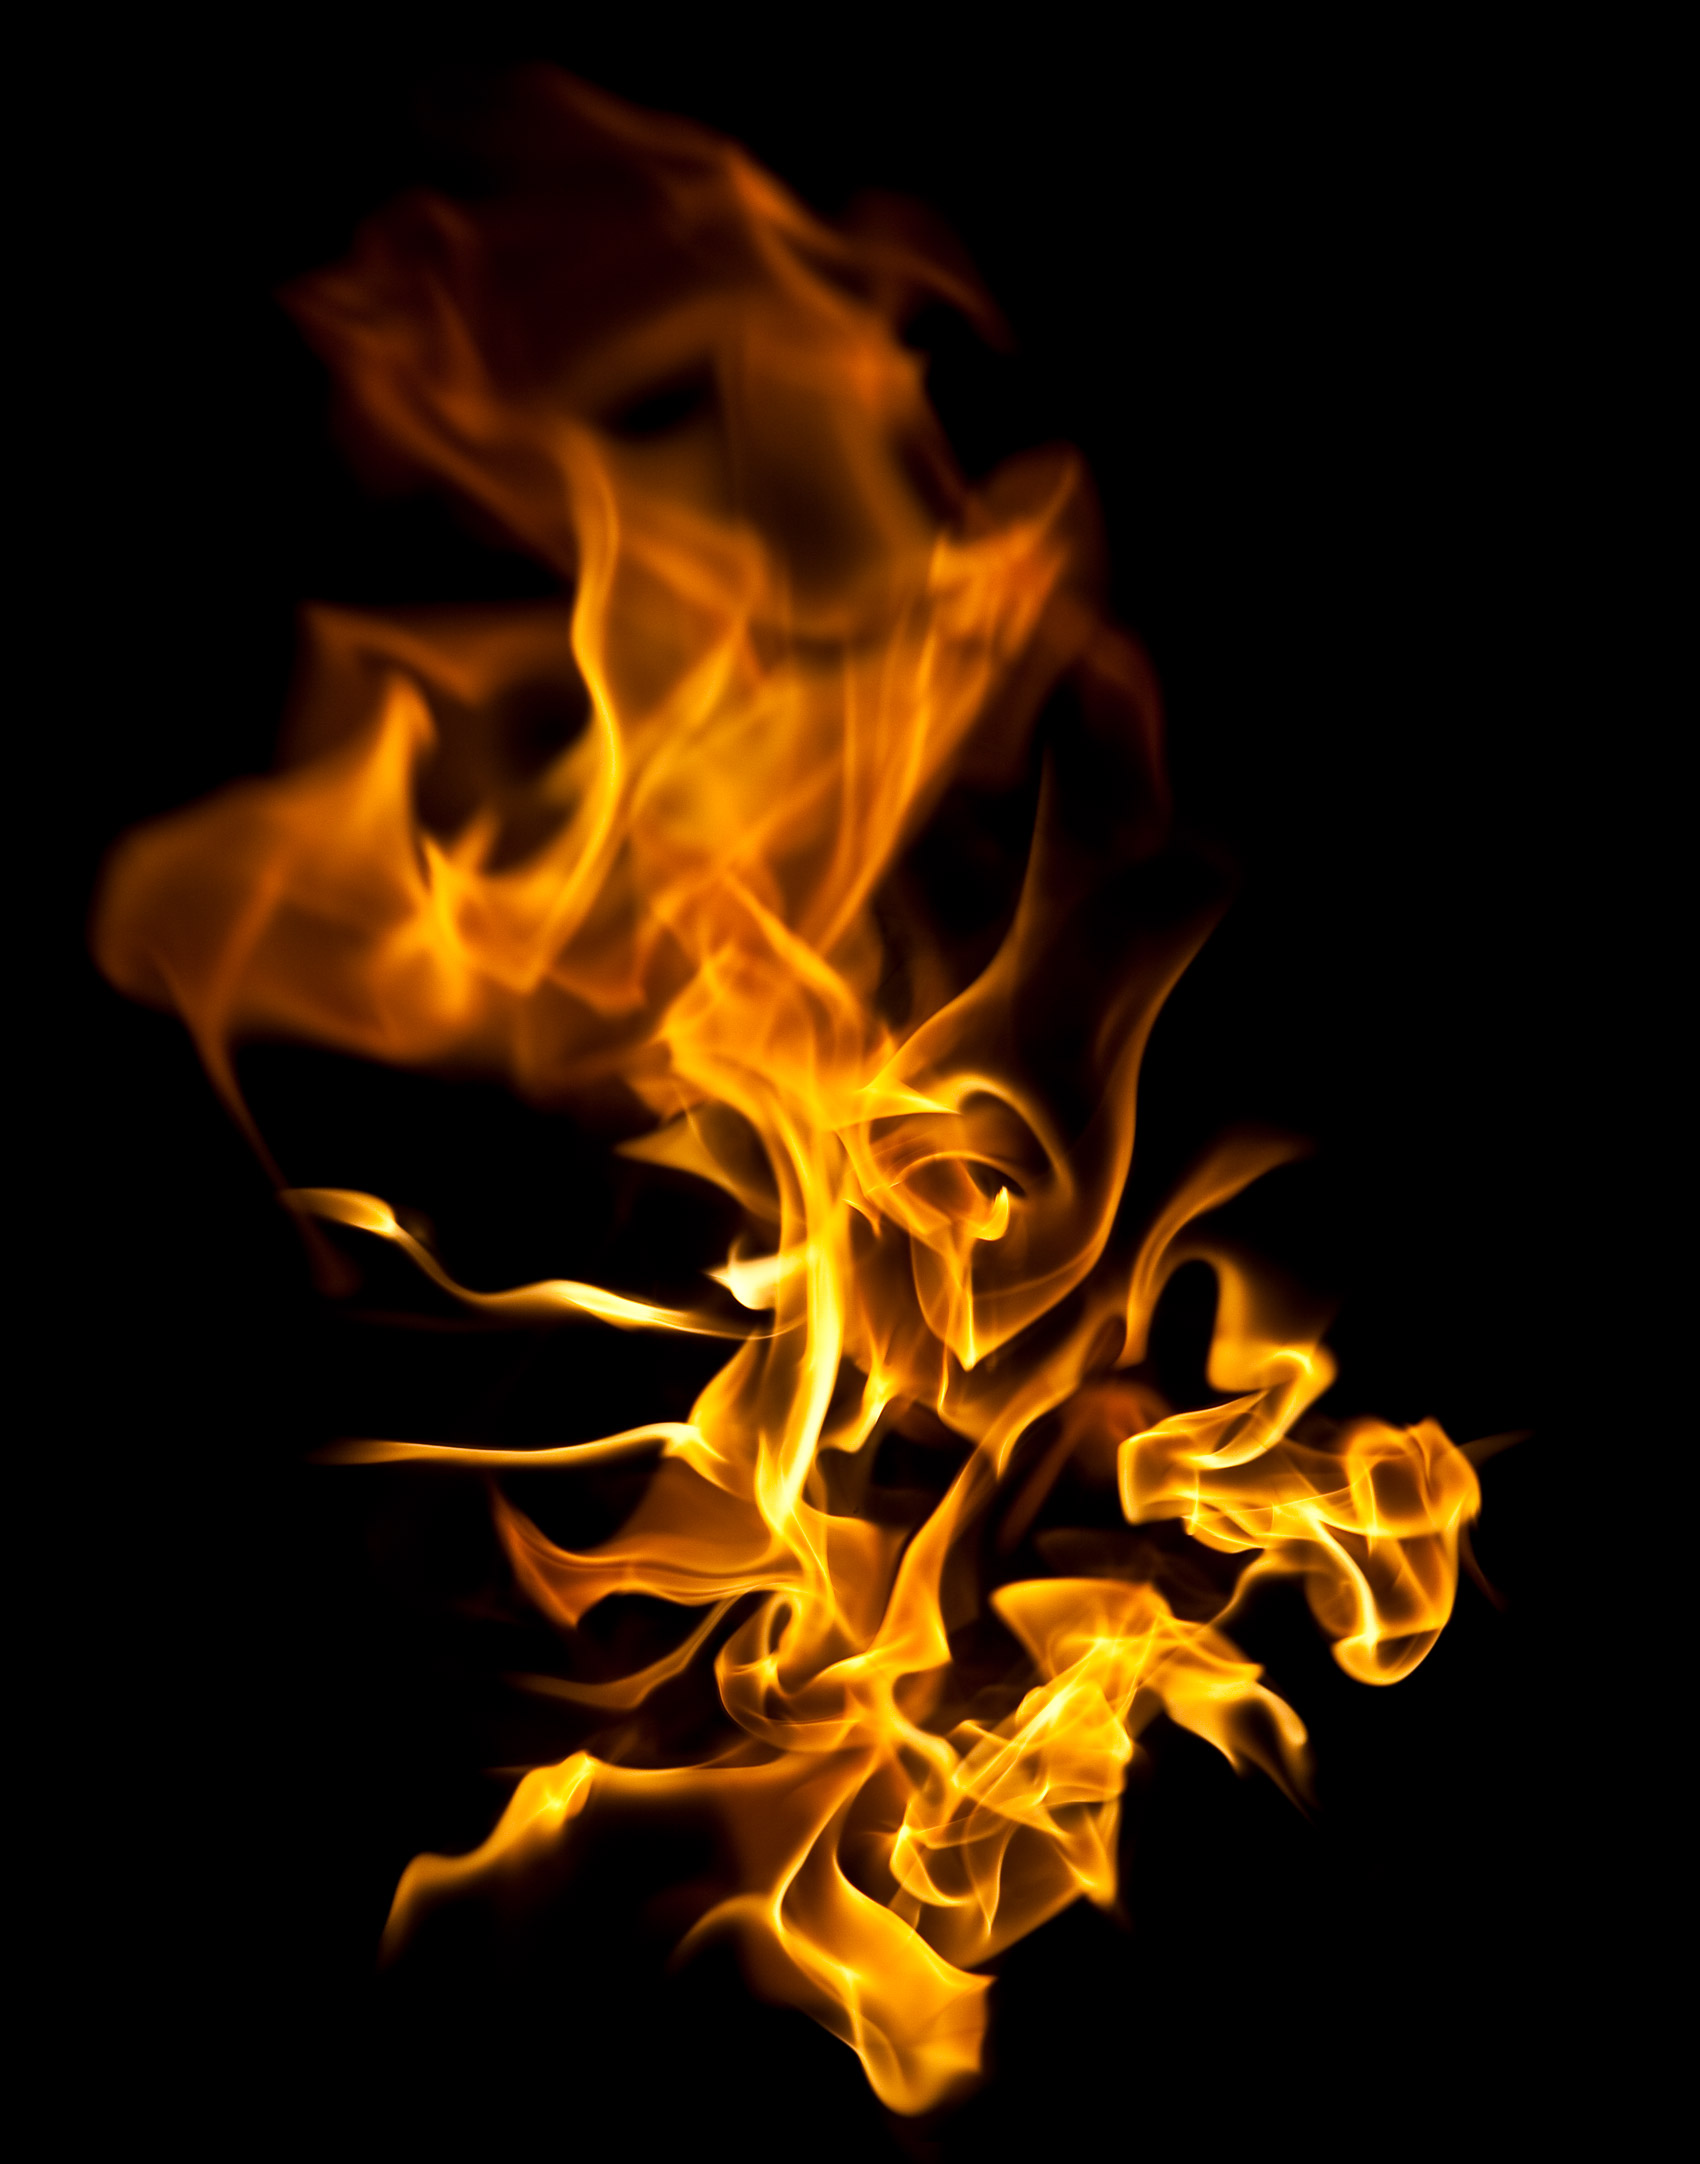 Flames of Fire Photography